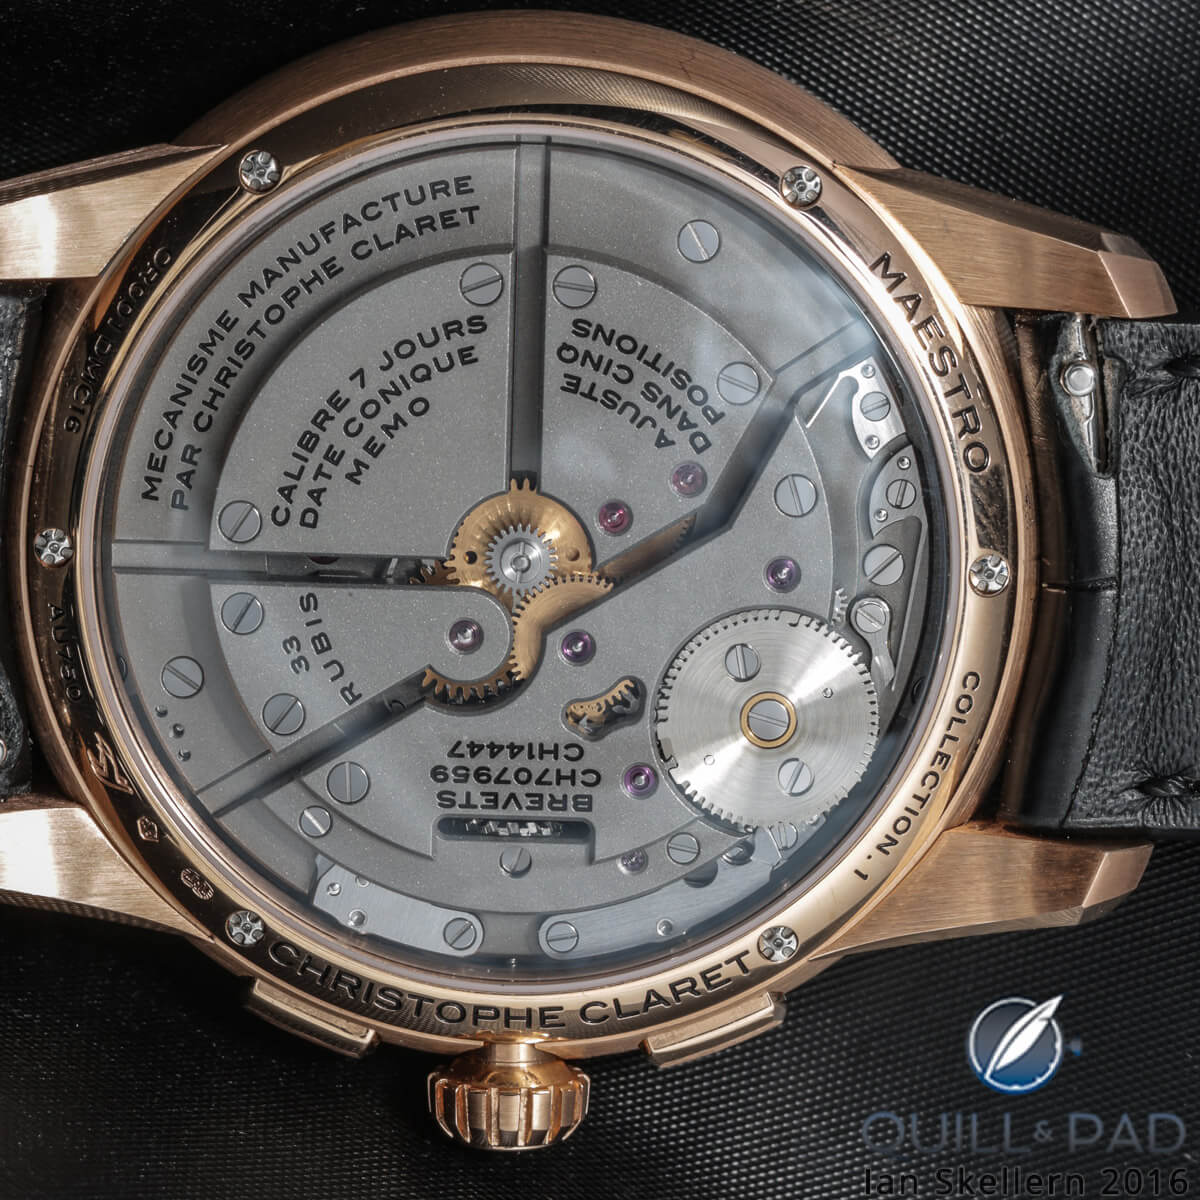 View from the back of the Christophe Claret Maestro in pink gold